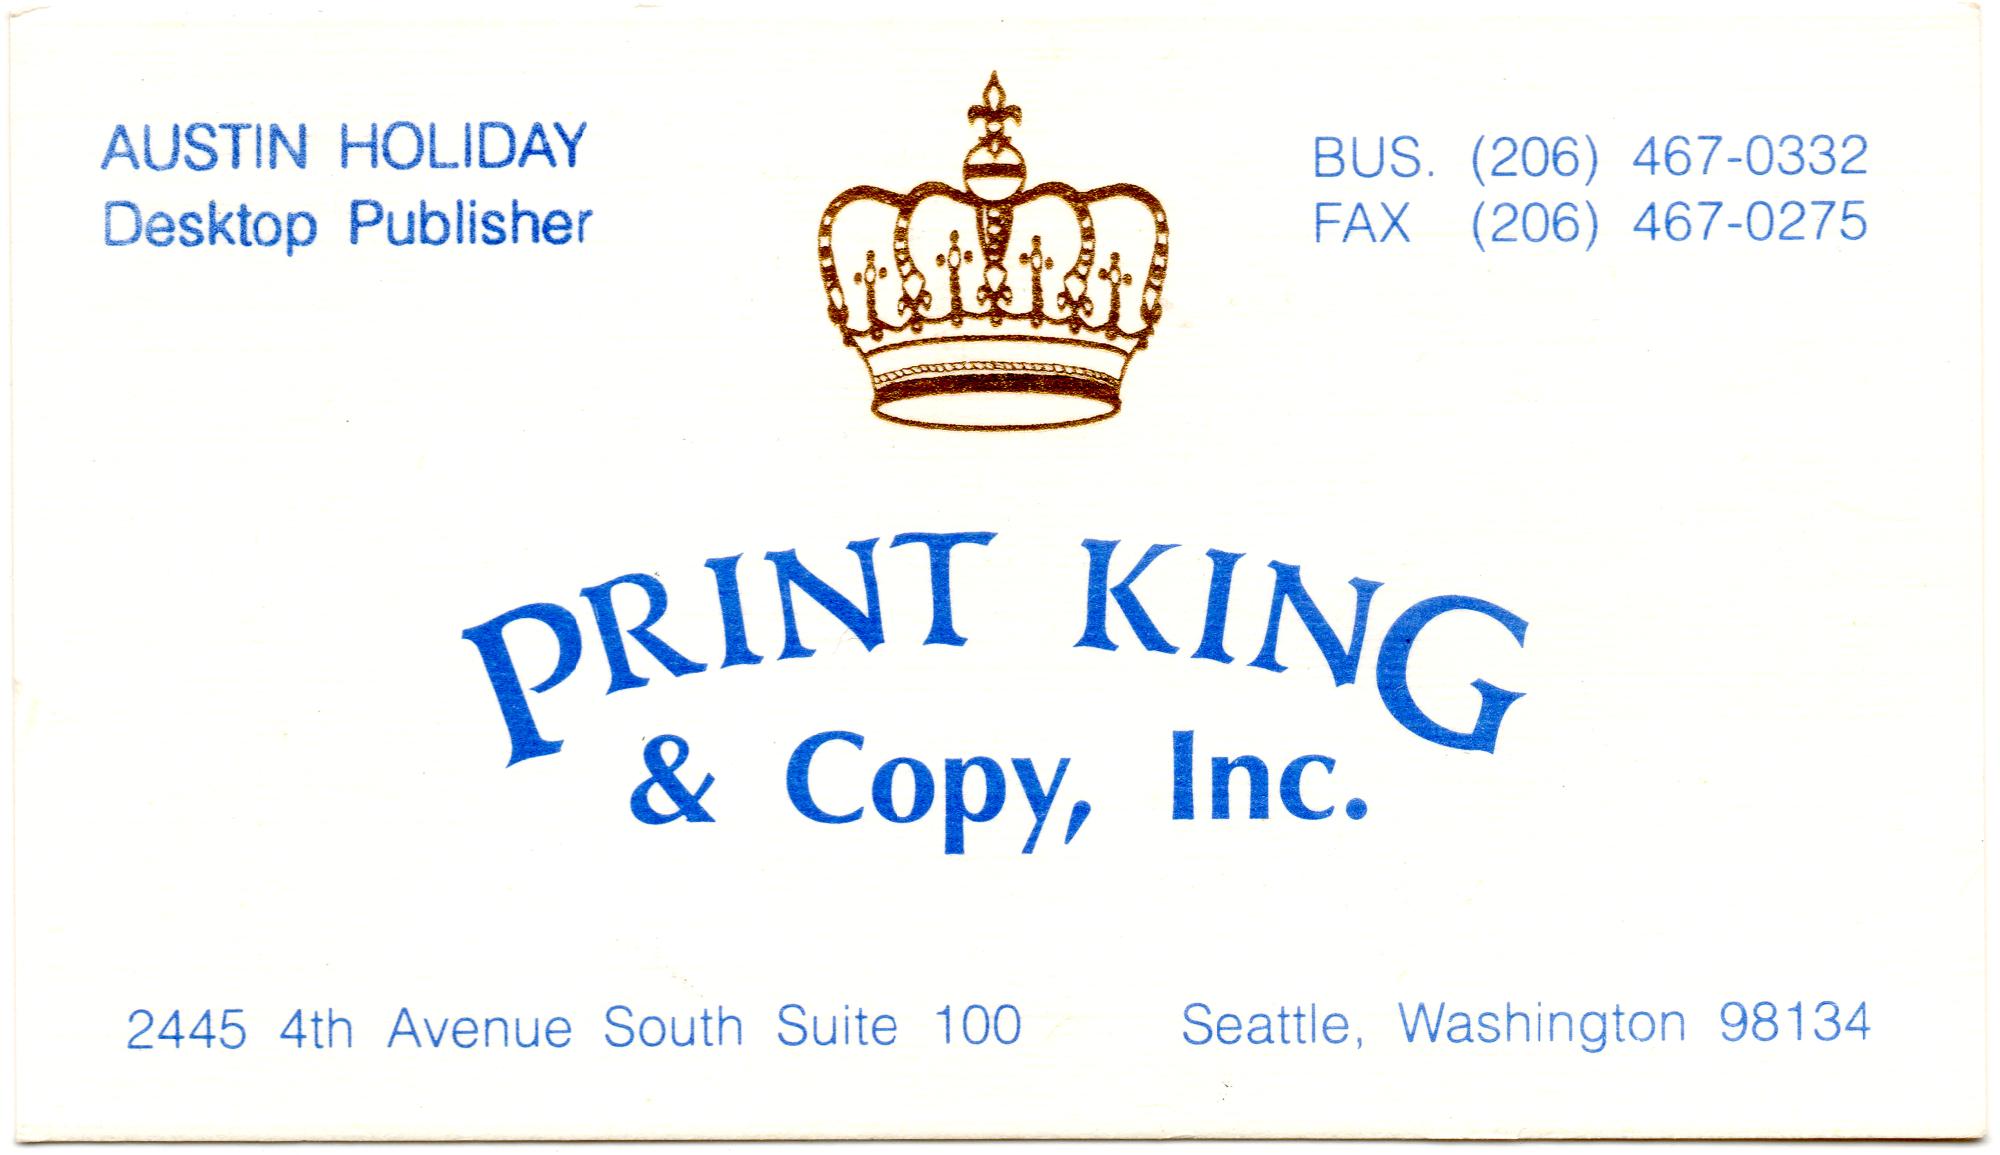 Working All Over - Bus Card Print King